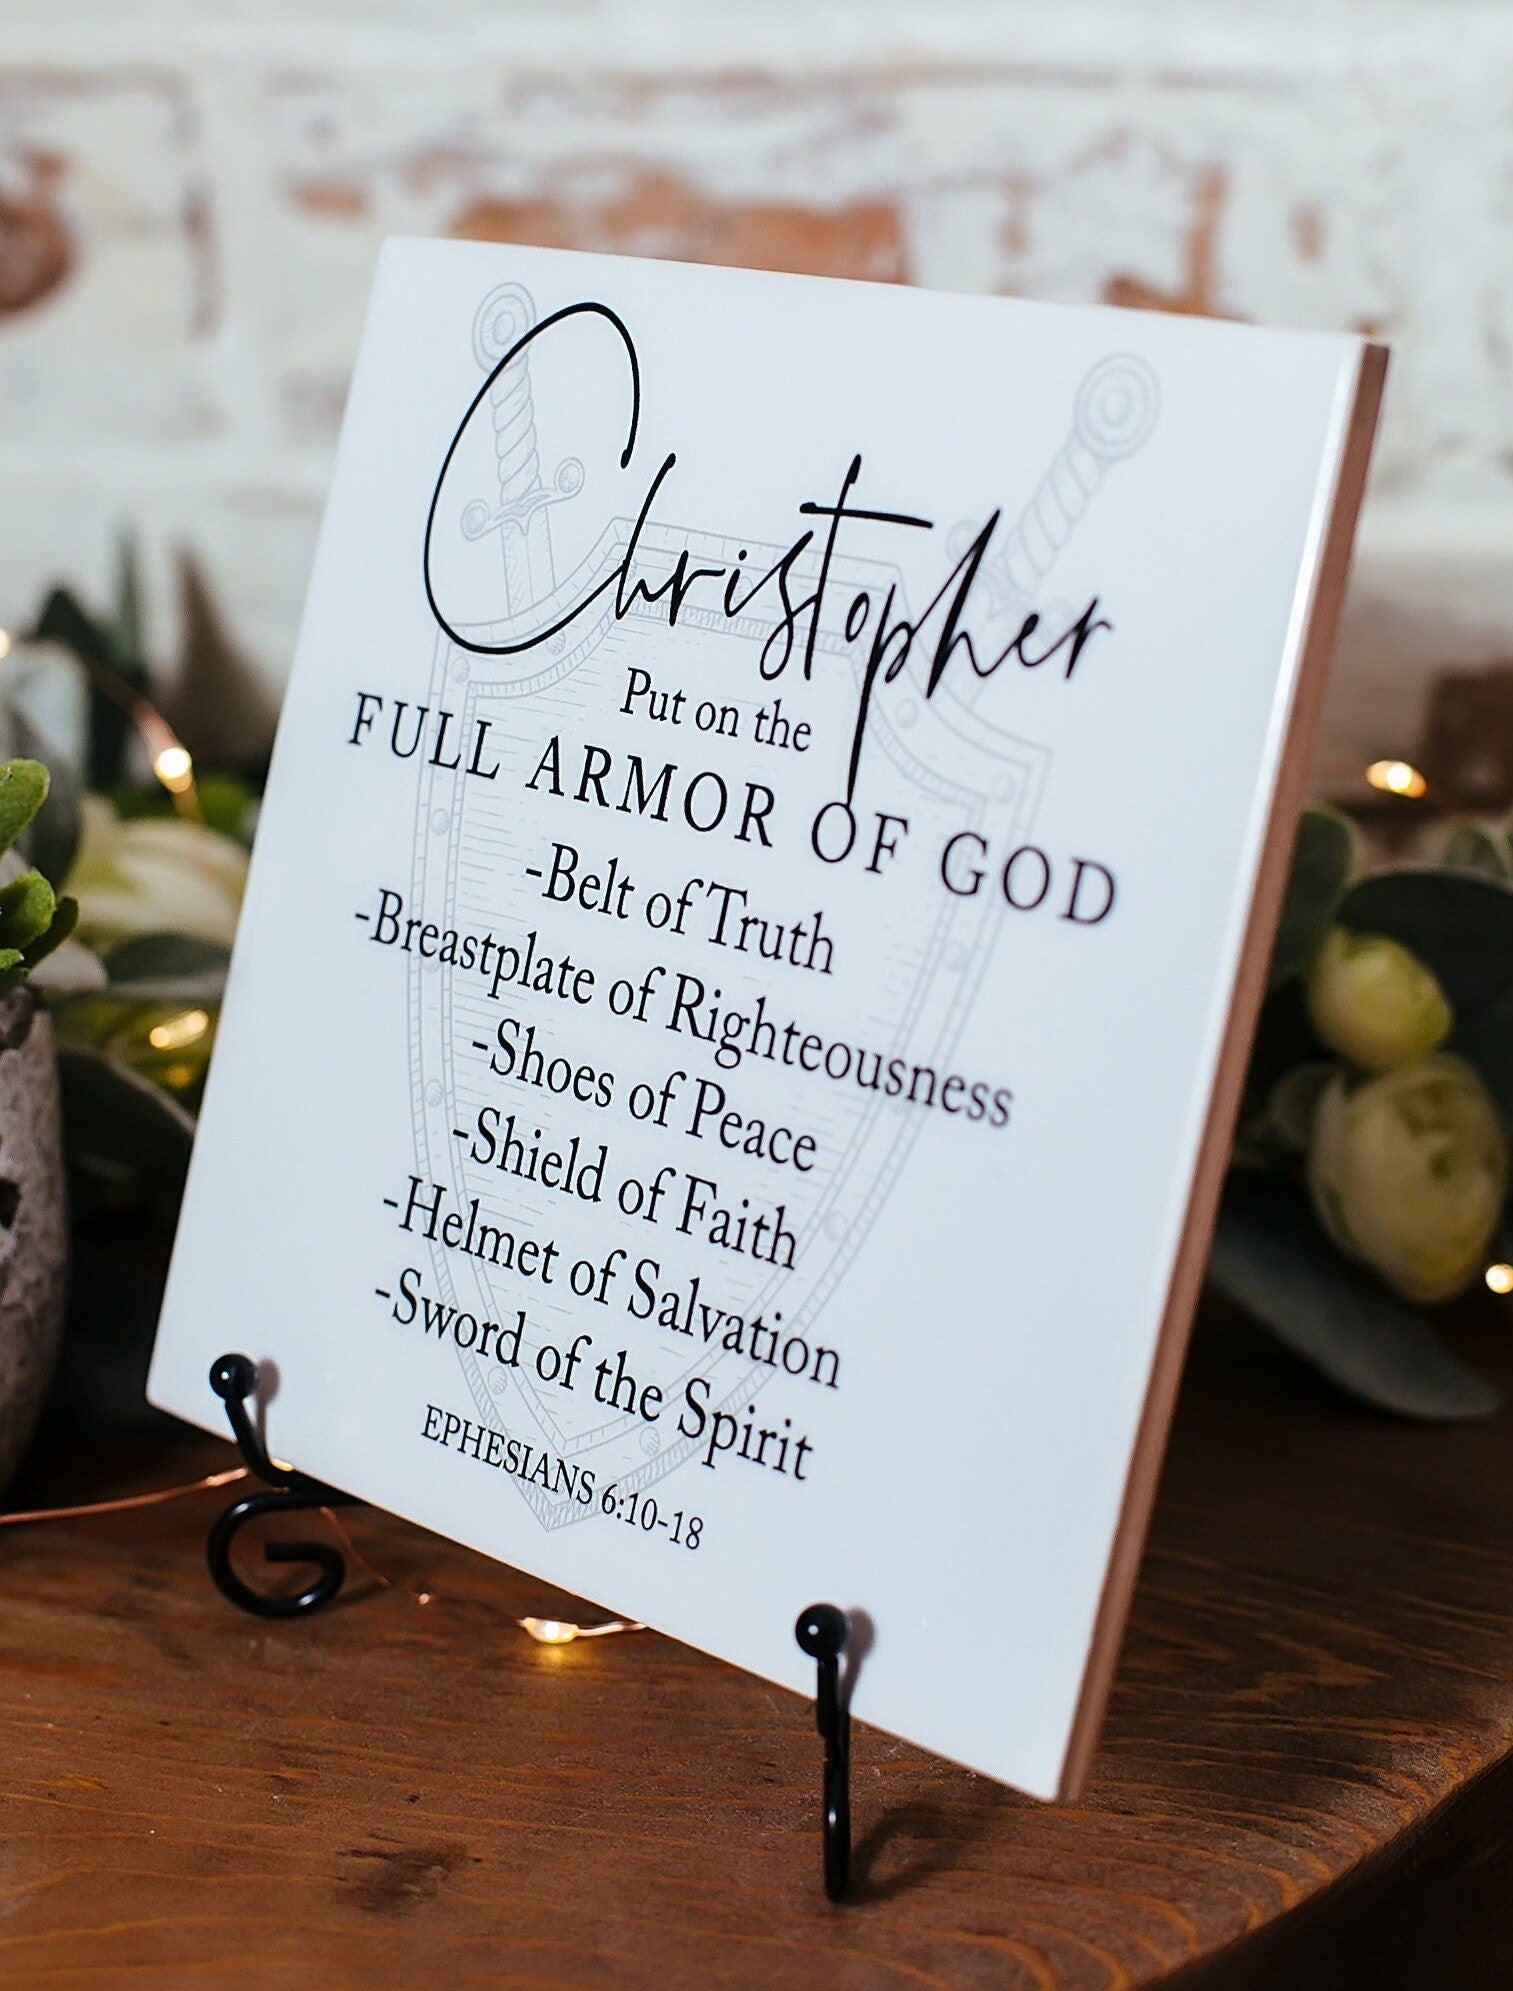 Put On The Full Armor Of God Personalized Christian Gifts for Men, Teens, Boys, Unique Christian Art, Baby Shower Scripture Bible Verse